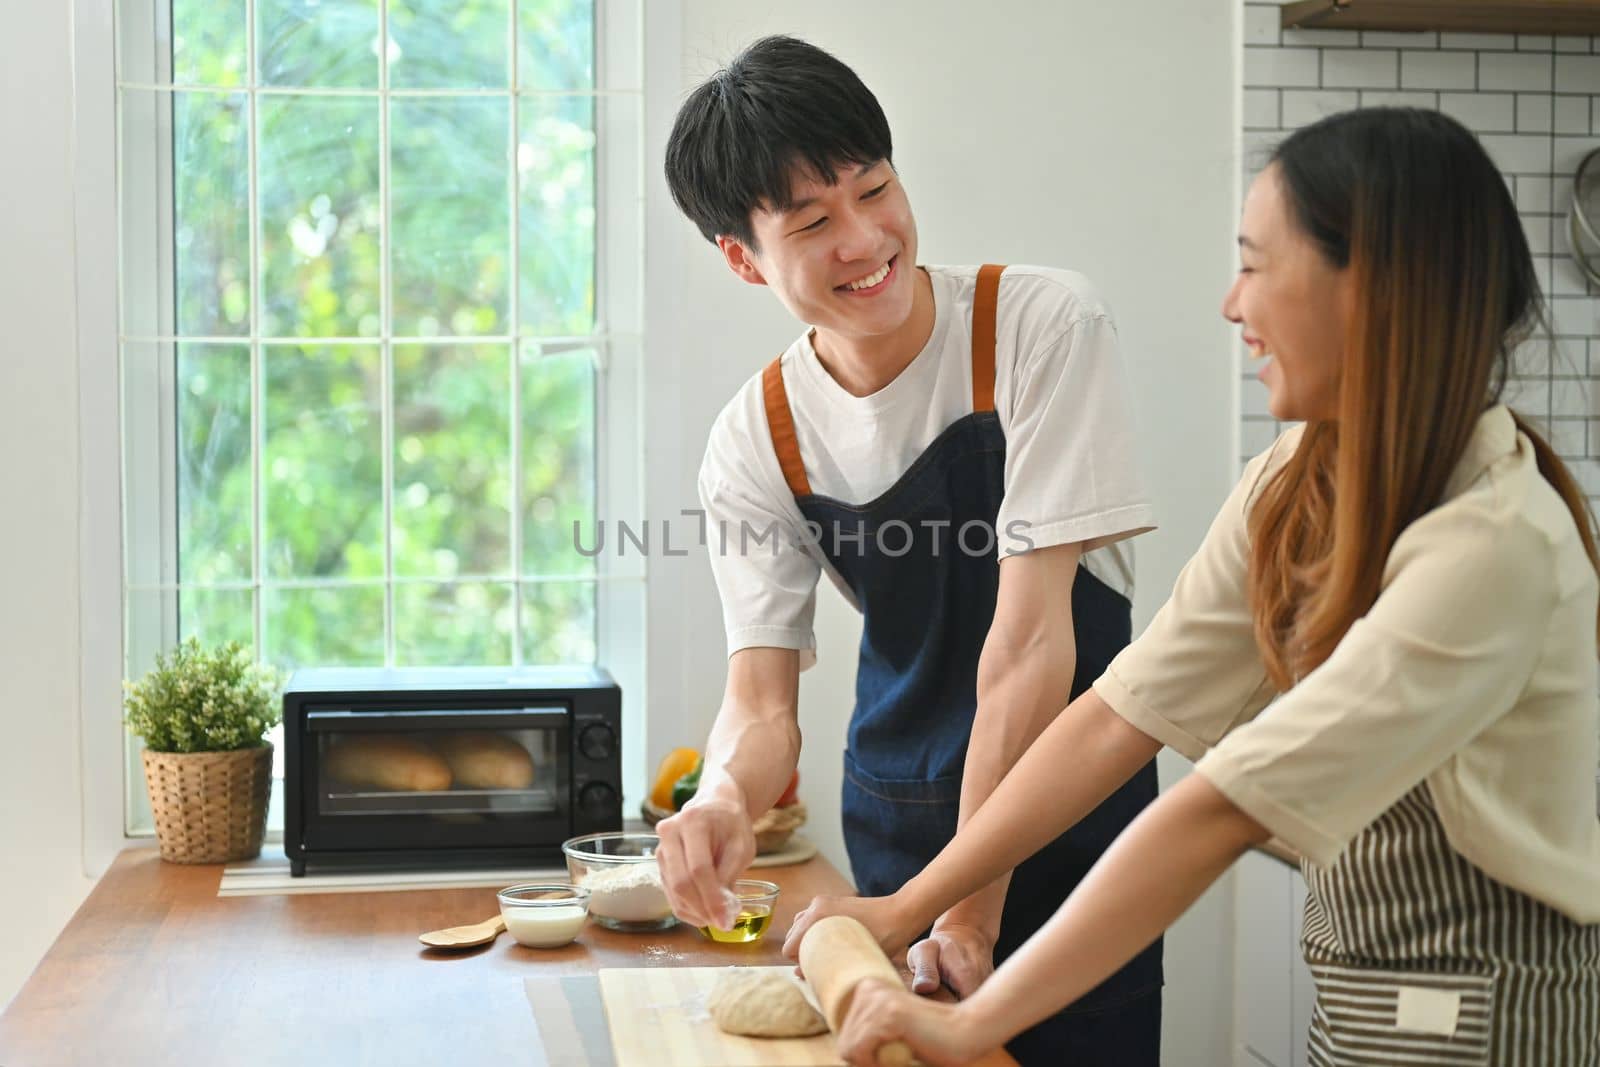 Romantic asian couple preparing homemade pastry on wooden table in kitchen. Love, relationship, people and family.